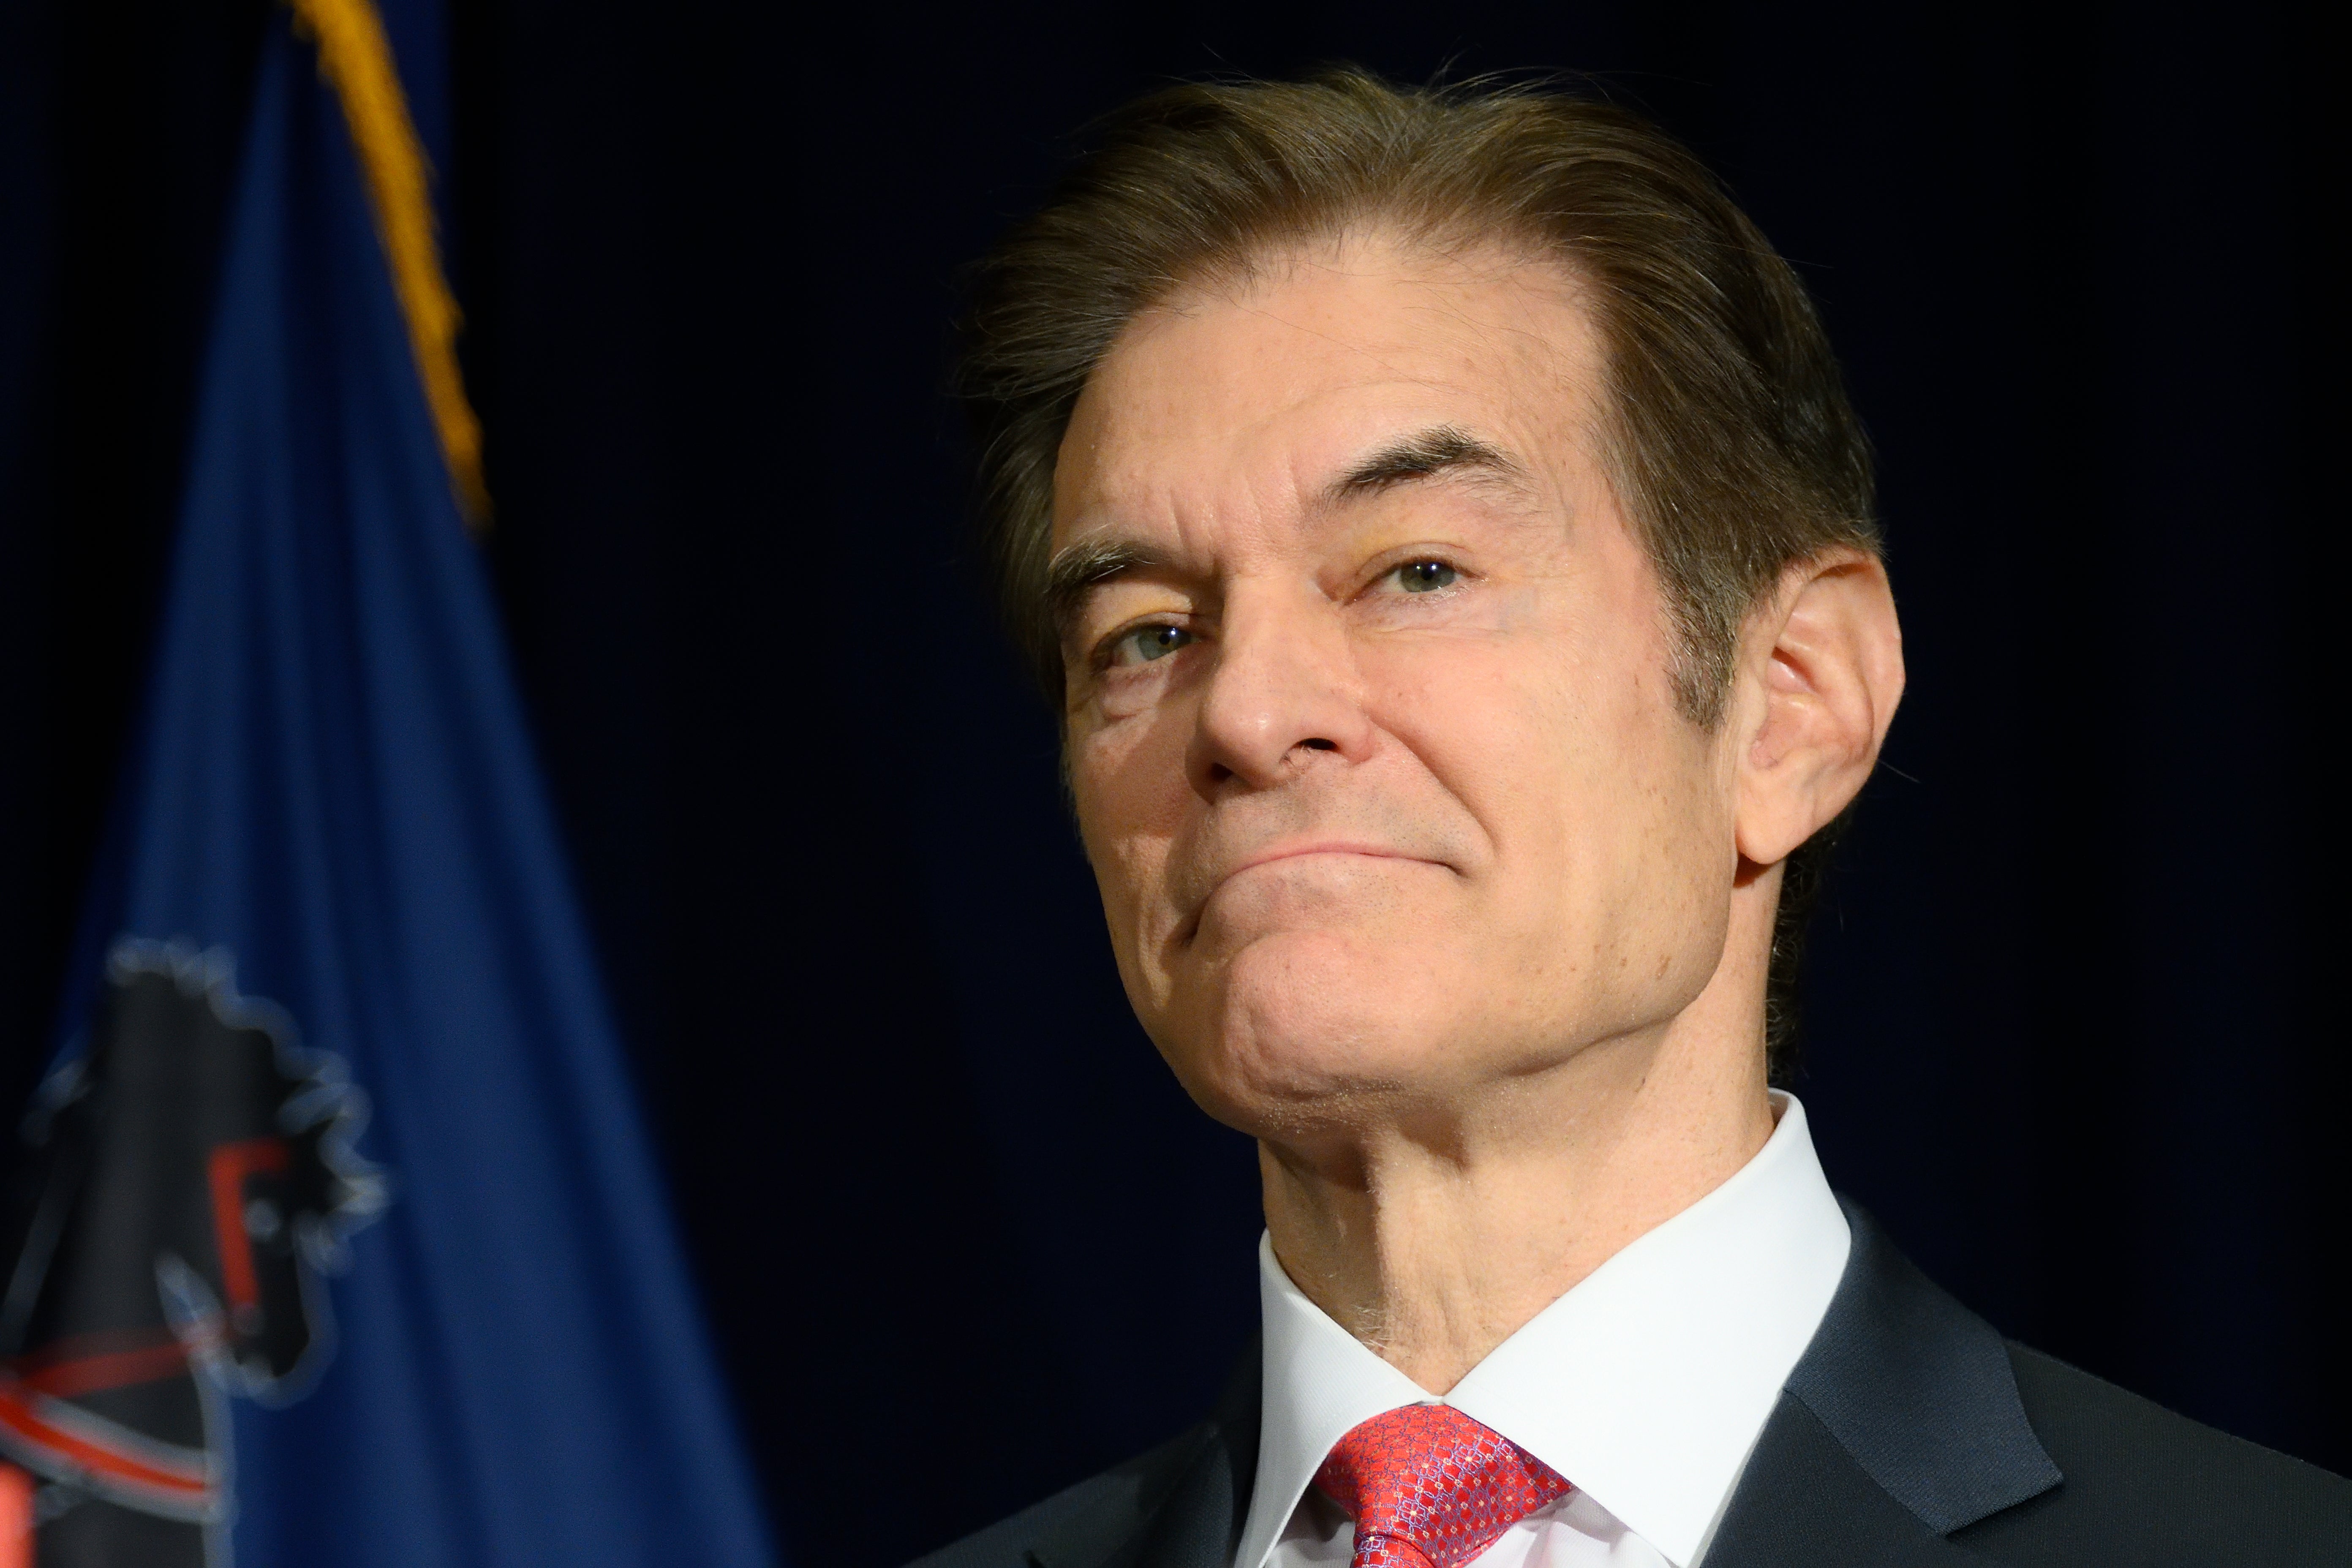 A close-up photo of Mehmet Oz, the Republican candidate in Pennsylvania running for Senate, having a press conference about how his opponent won't debate him.